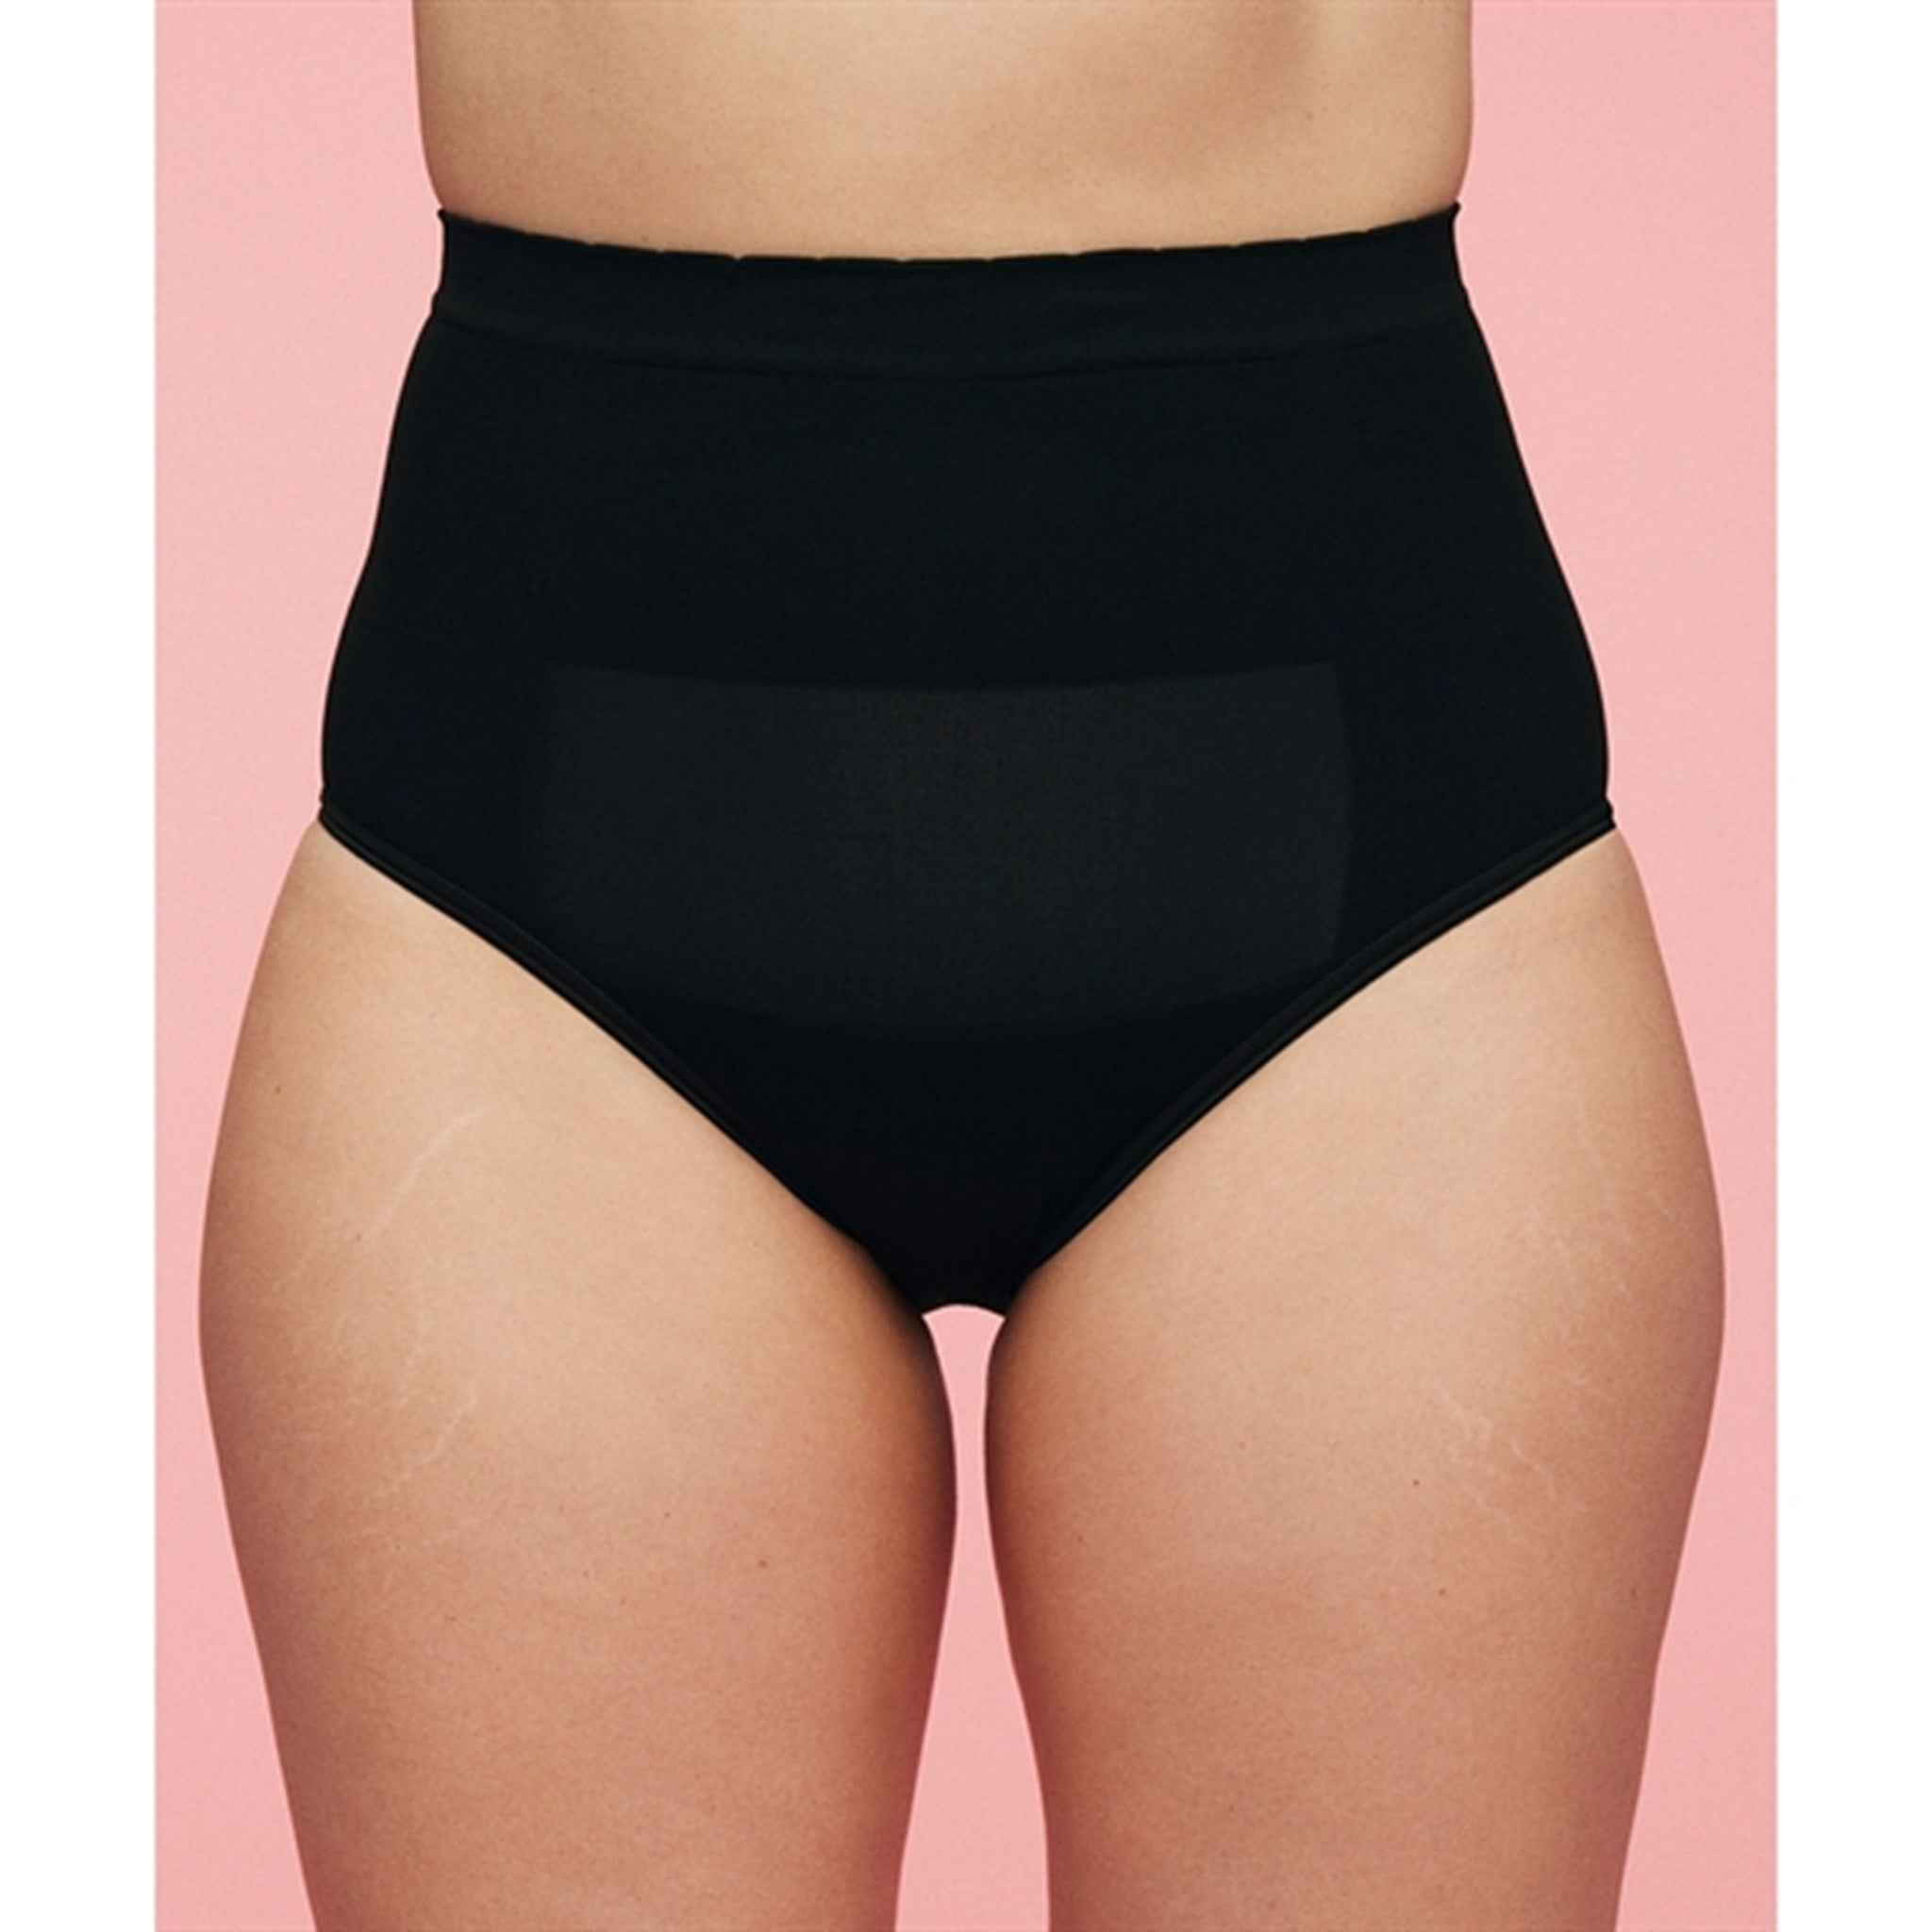 momkind C-section Panties – Support Scar and Belly Black 4